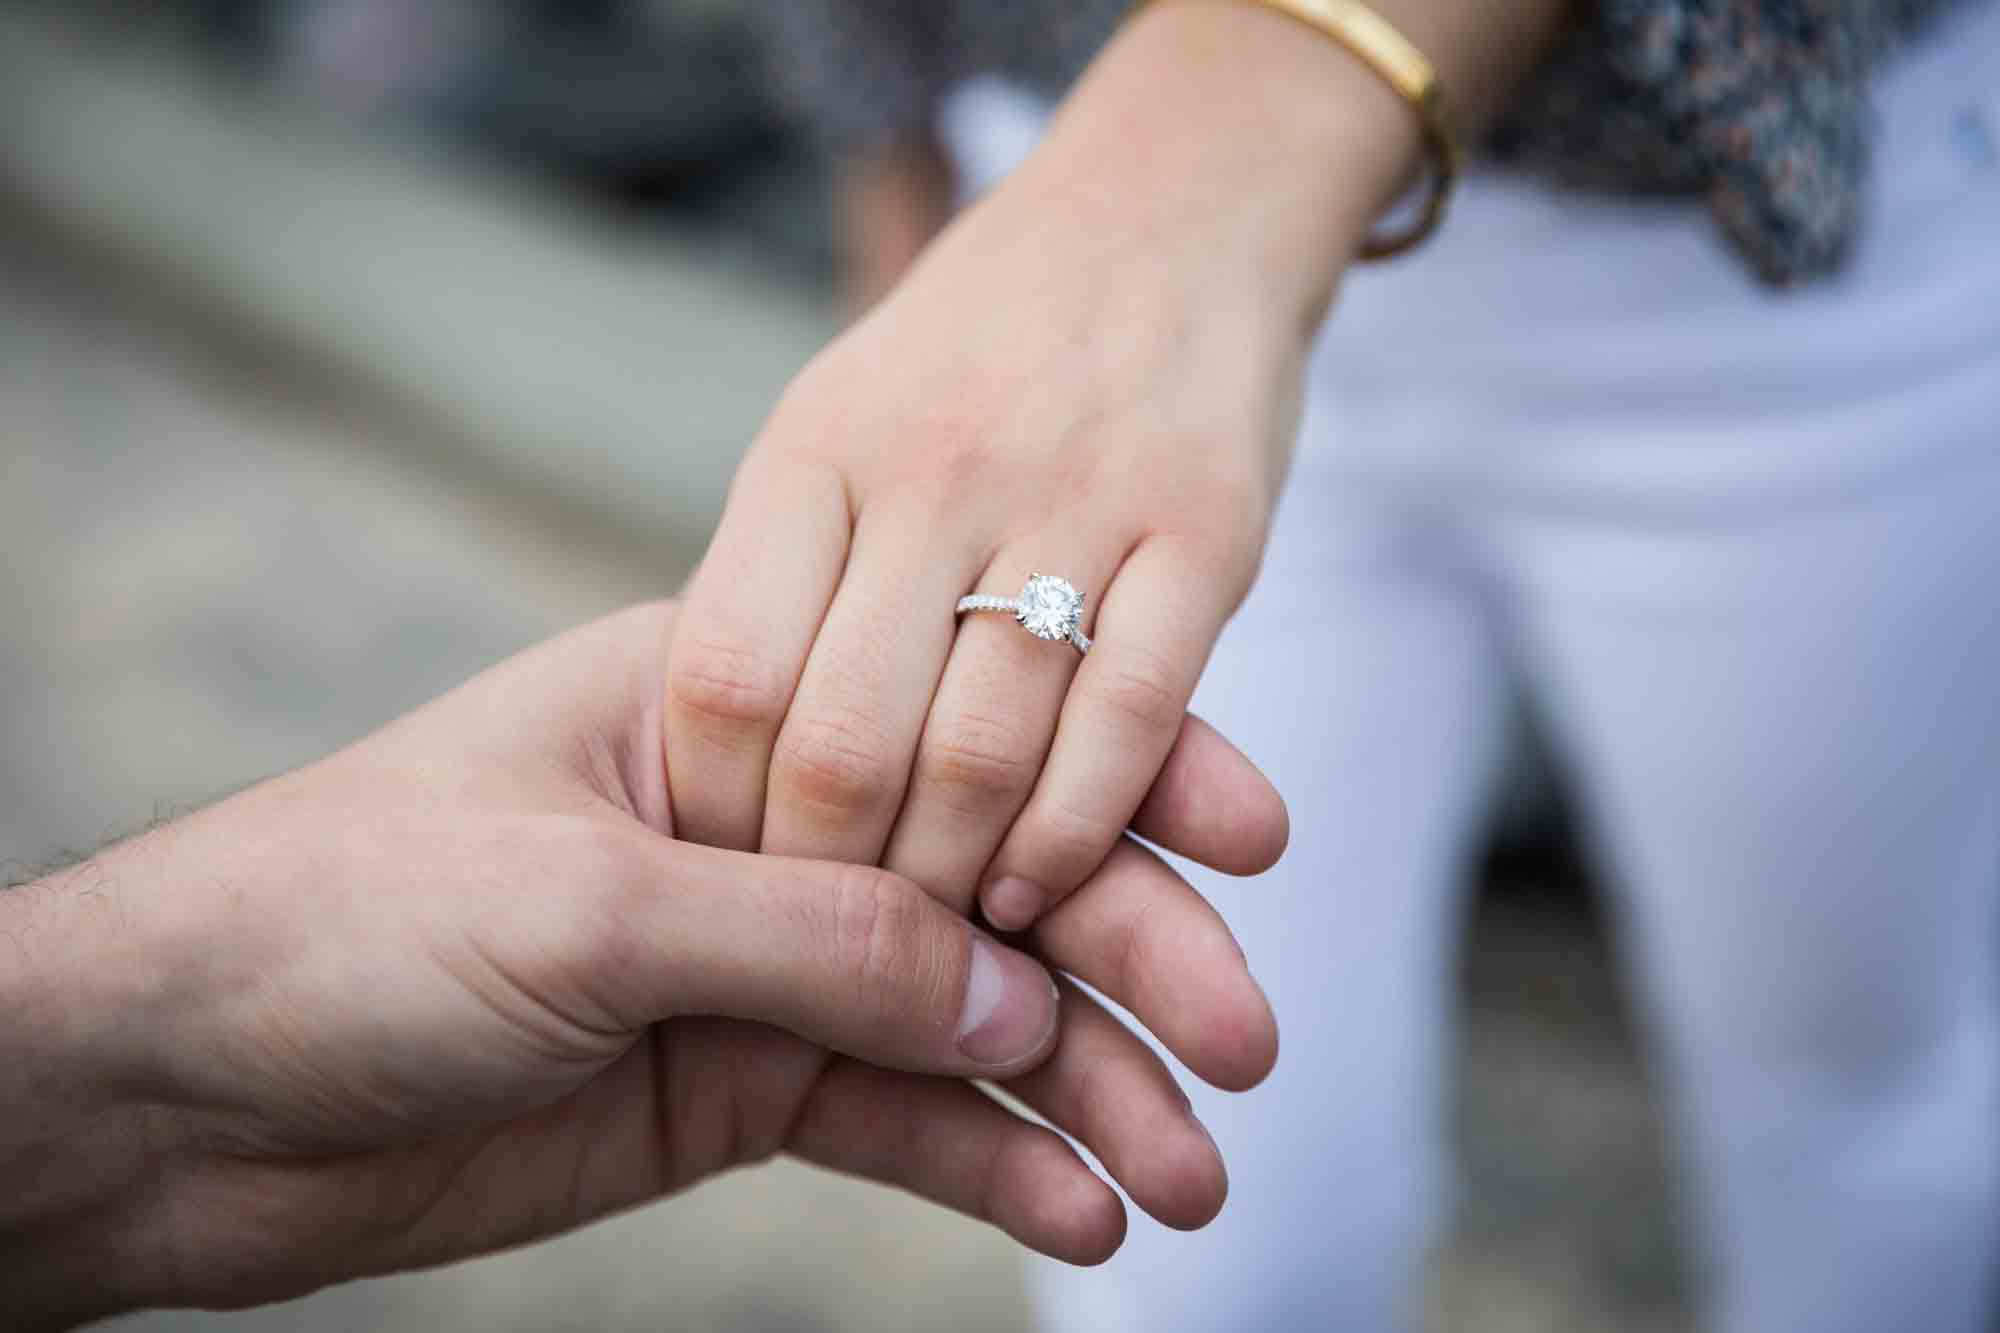 Close up of man holding woman's hand showing large diamond engagement ring